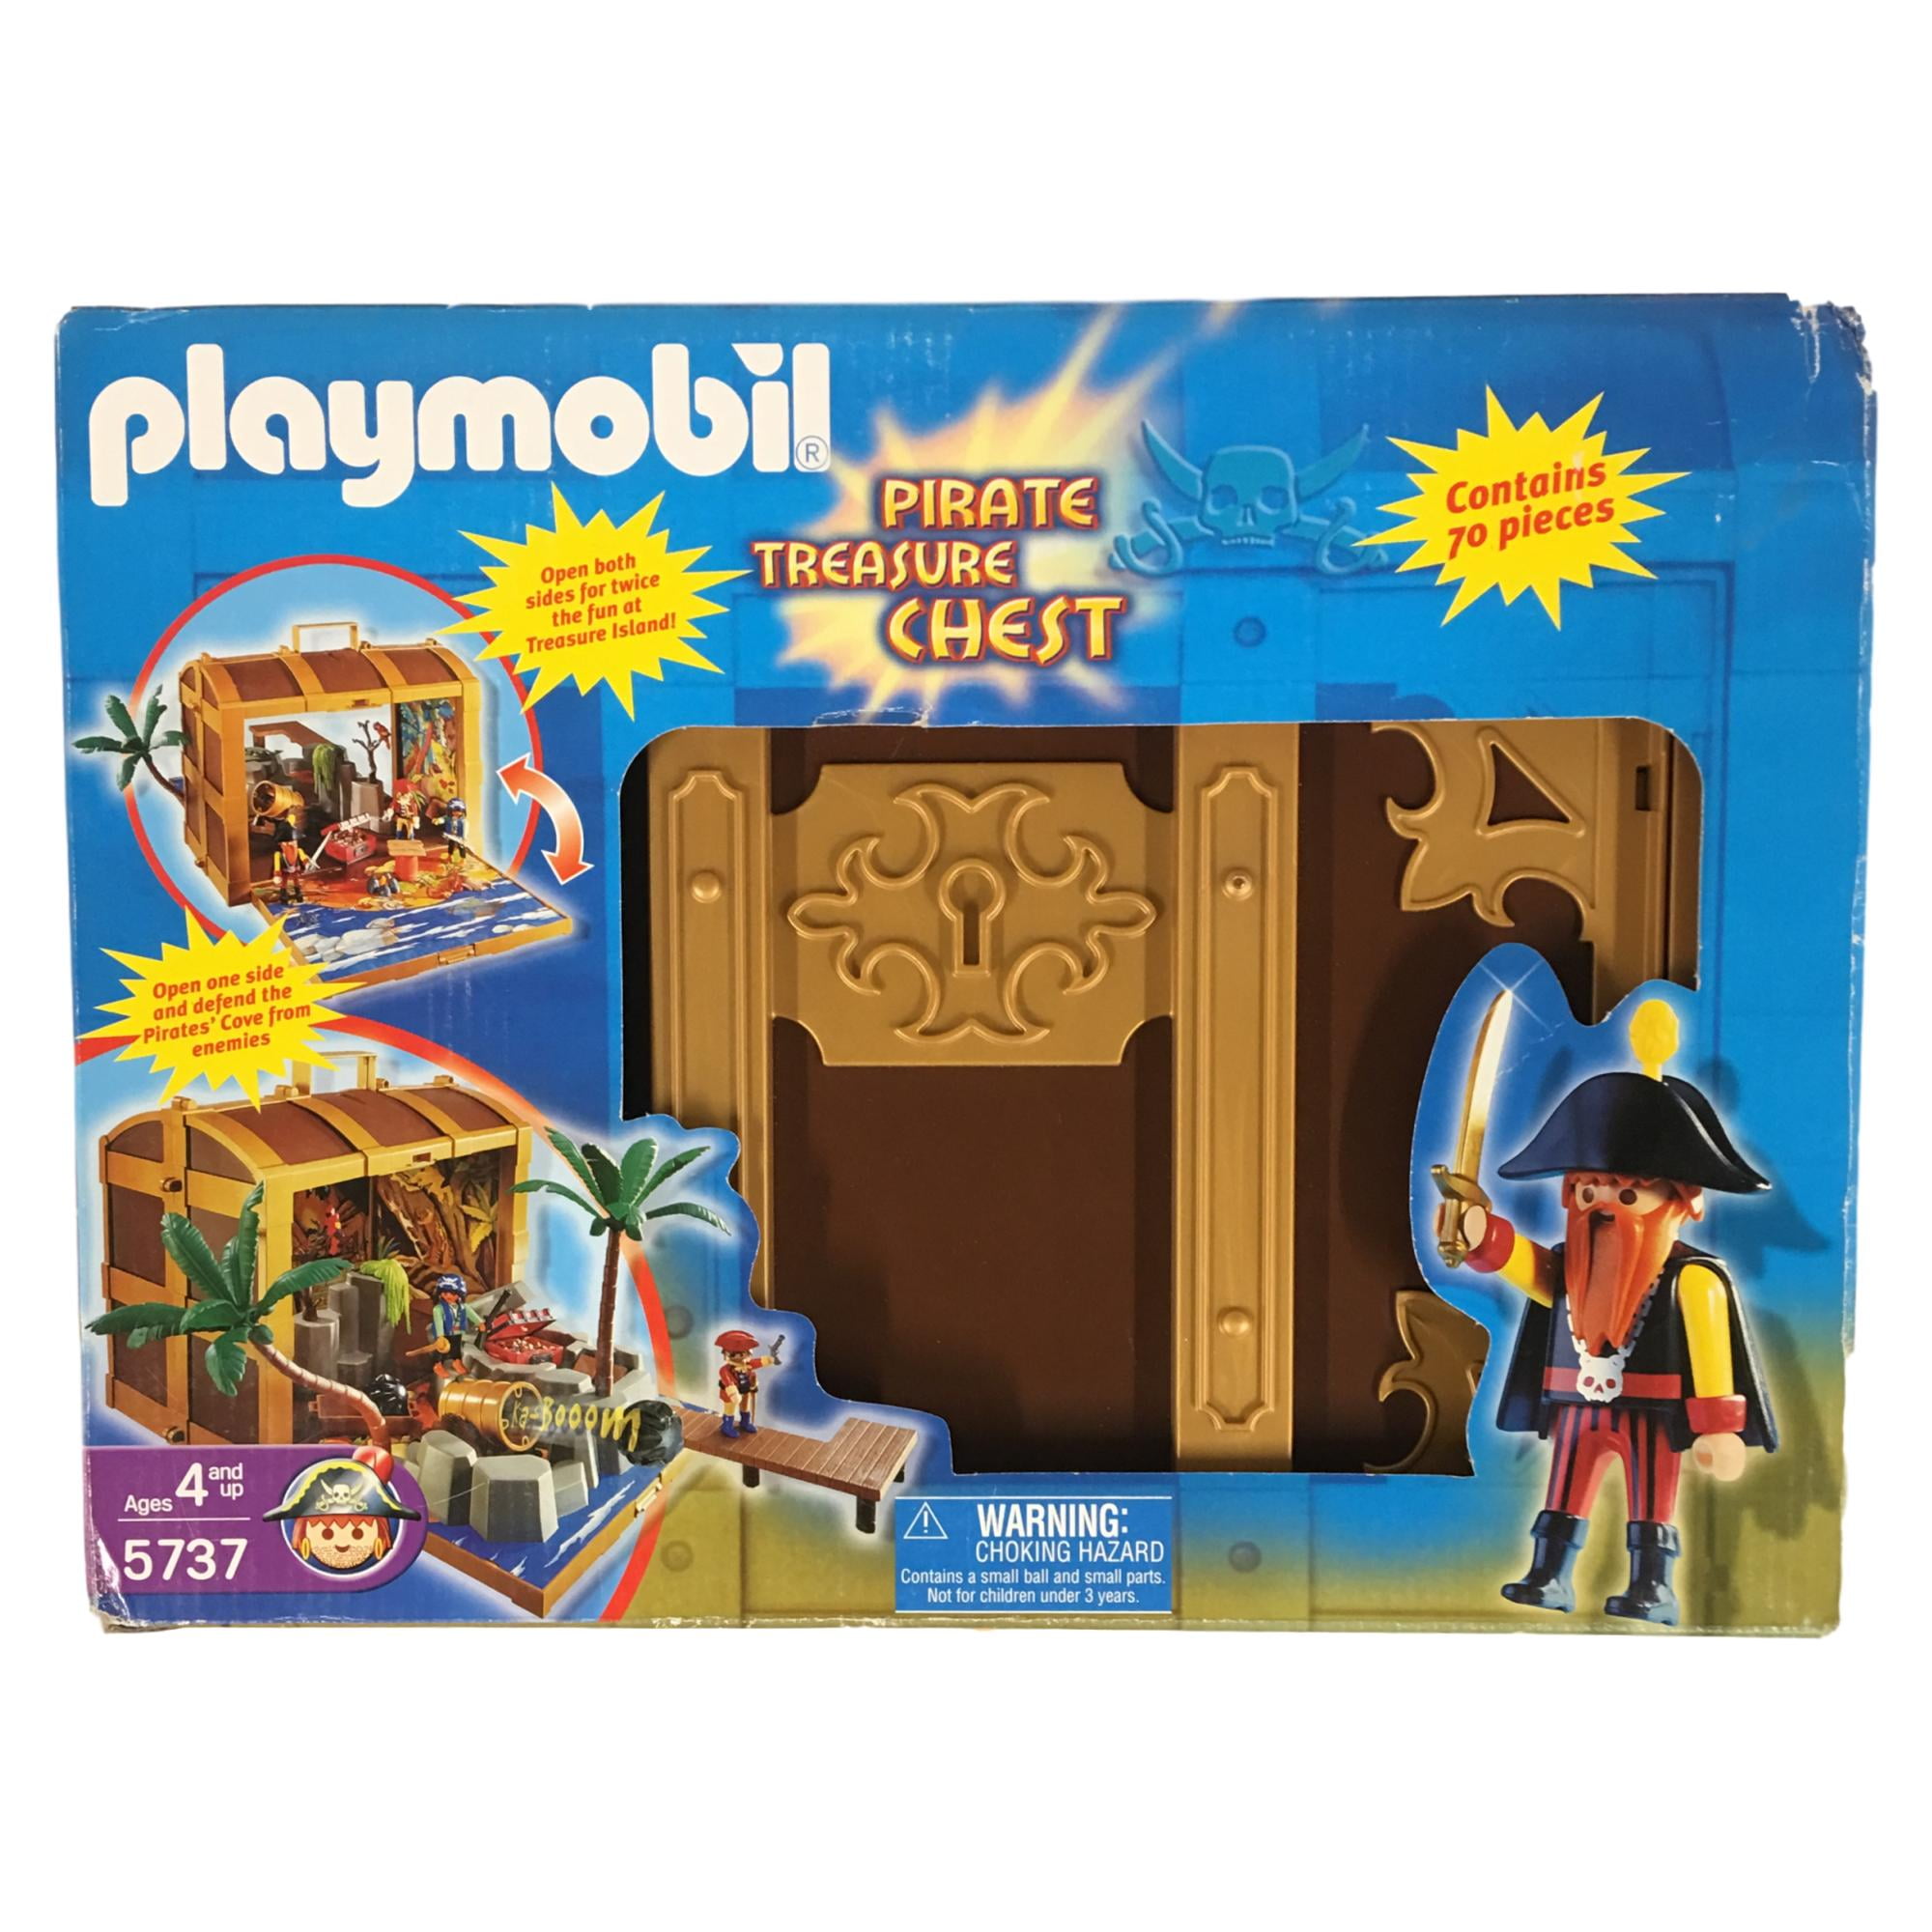 Playmobil U CHOOSE Pirate Treasure Chest castle Western wood crate gold coin 